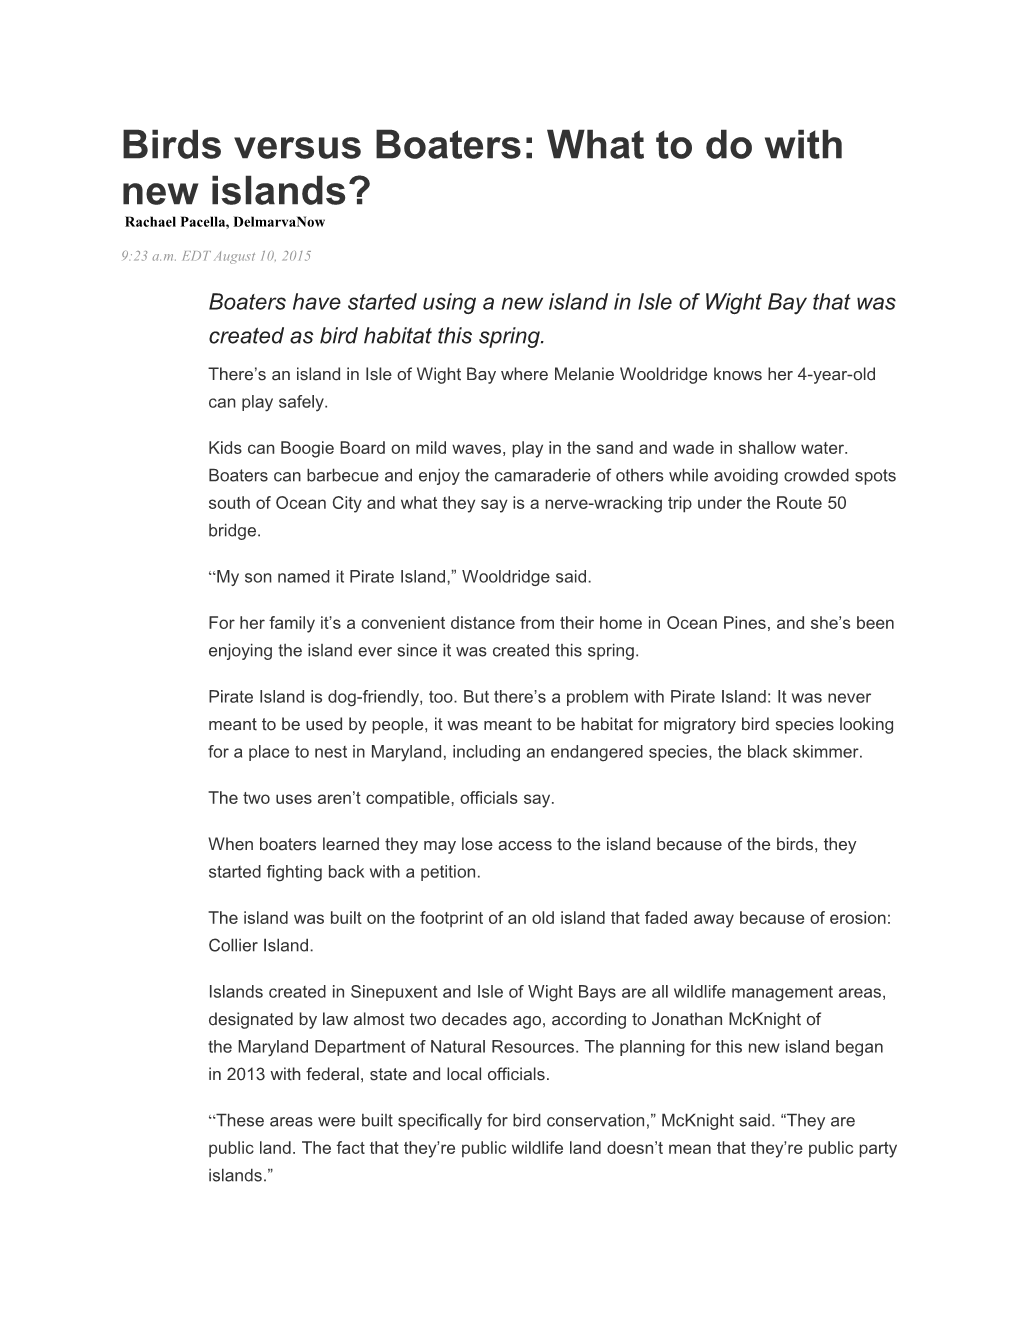 Birds Versus Boaters: What to Do with New Islands?